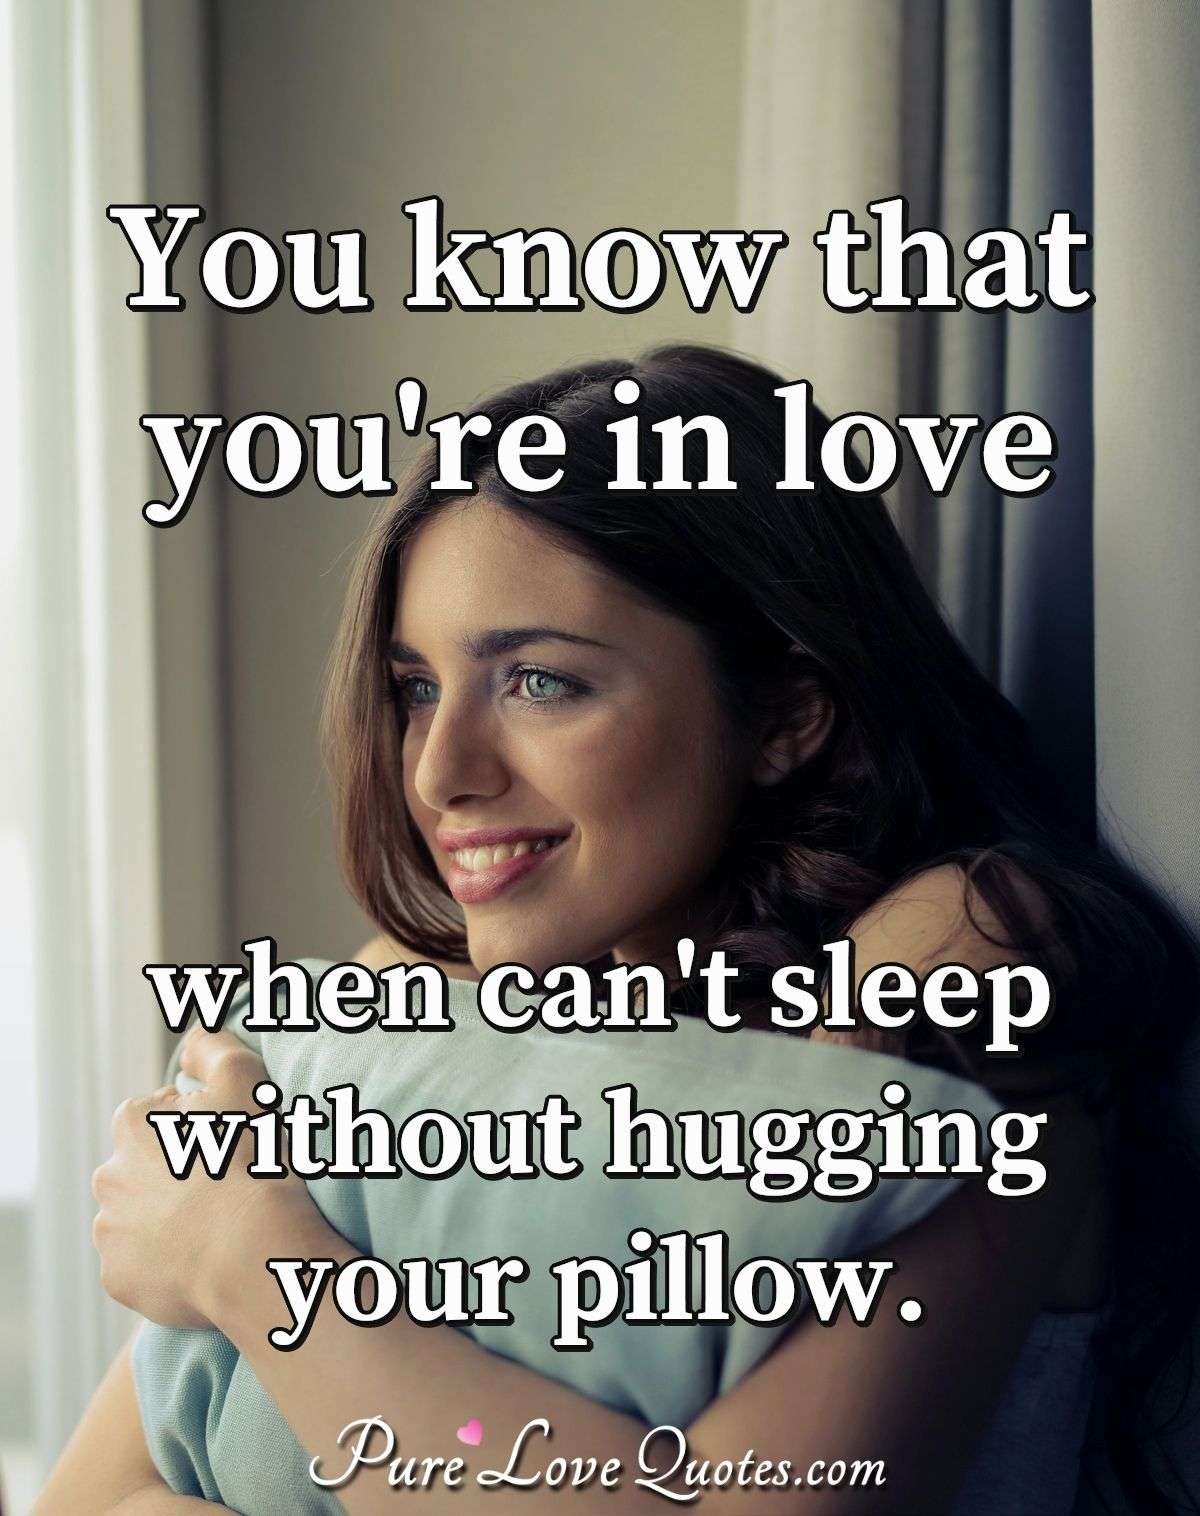 You know that you're in love when can't sleep without hugging your pillow. - Anonymous